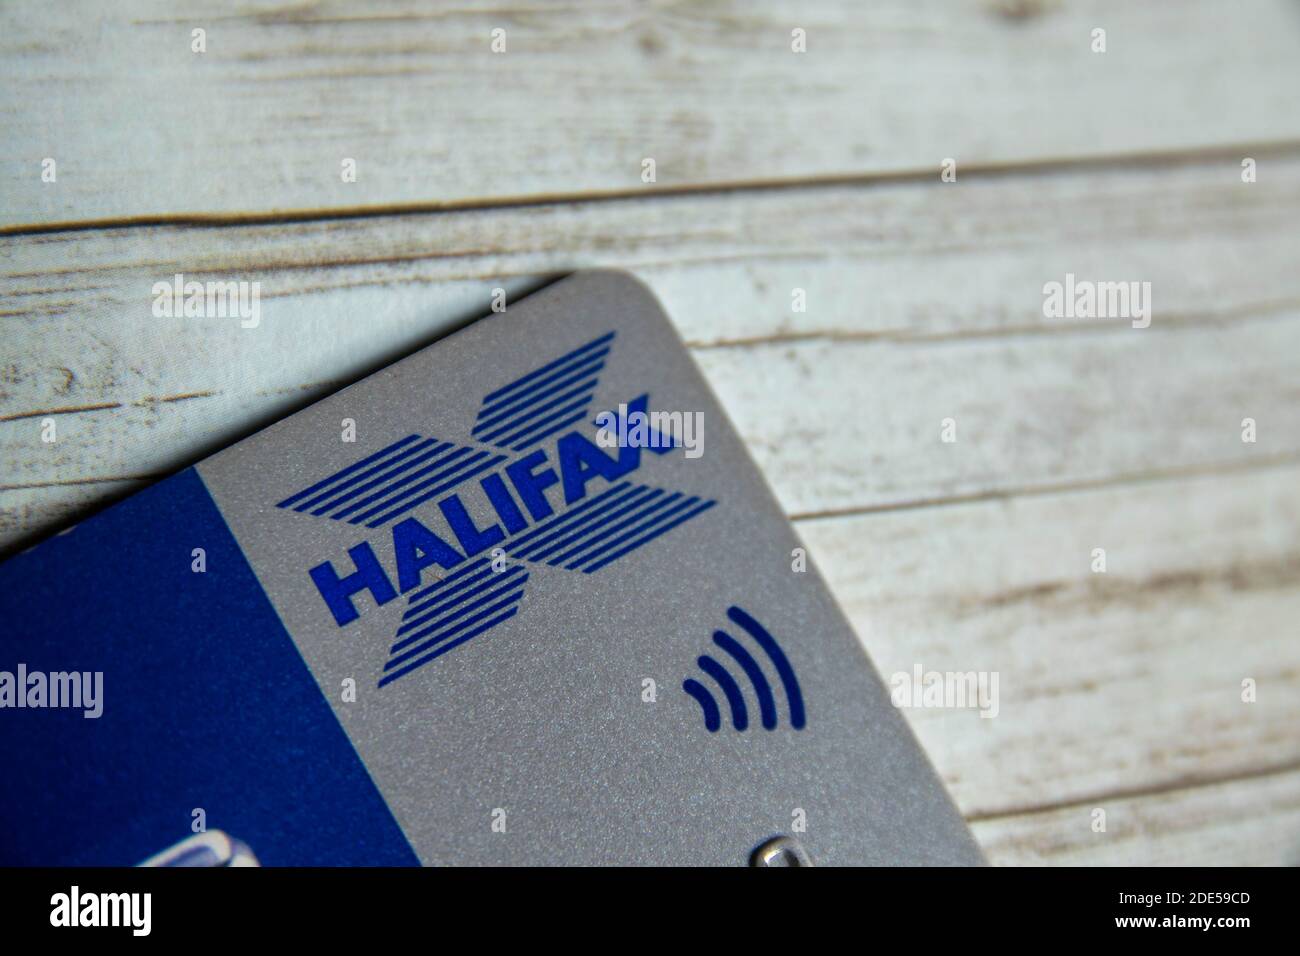 Durham, UK - 7 May 20: Plastic contactless Halifax bank card on patterned background. Halifax is a British bank and building society dealing in debit Stock Photo